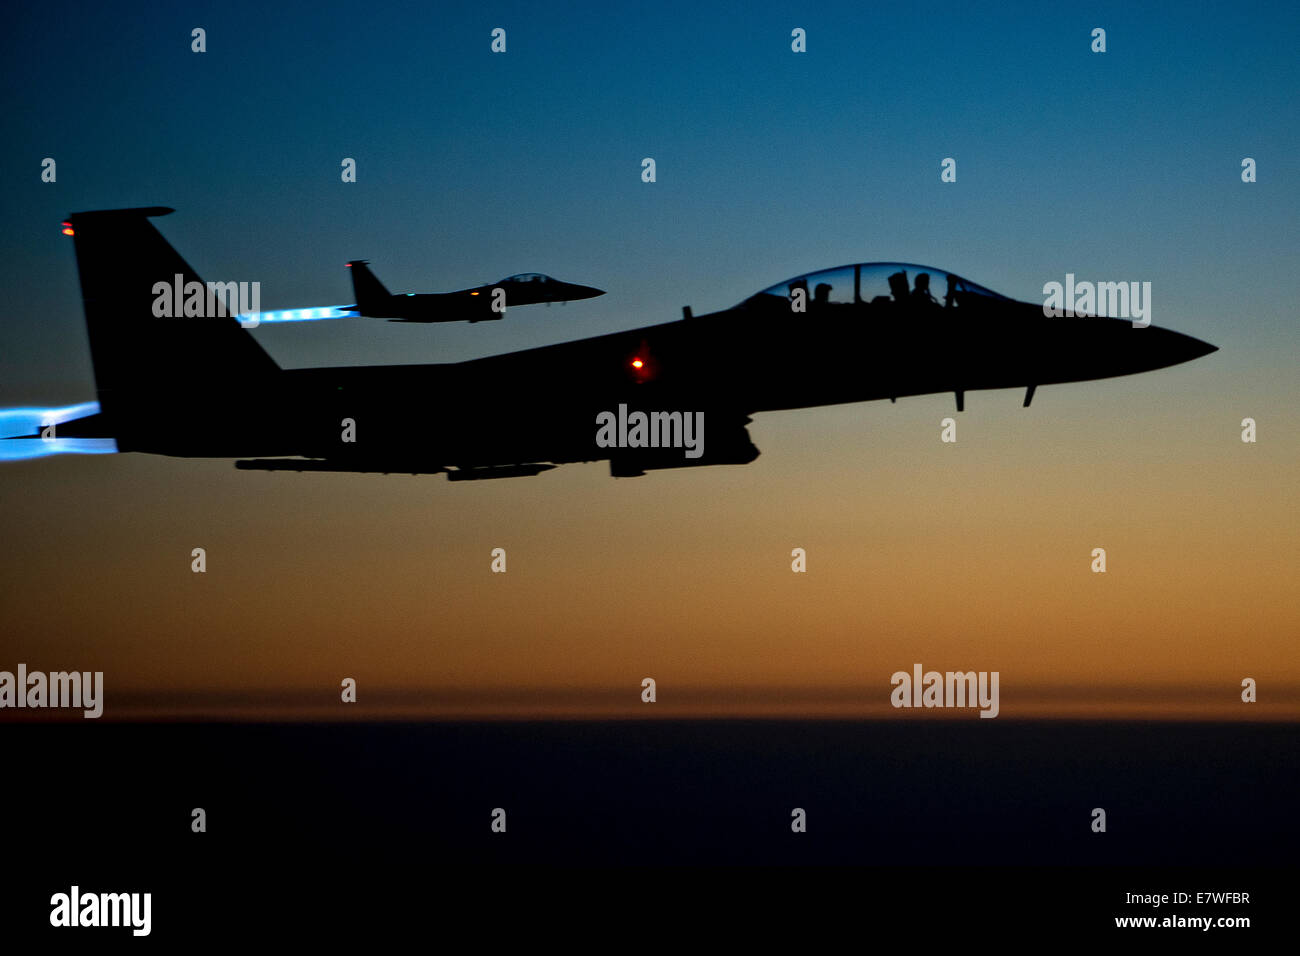 US Air Force F-15E Strike Eagle fighter aircraft are silhouetted by the setting sun as they fly over Iraqi airspace after completing combat sorties against ISIS targets in Syria September 23, 2014. The completed their first combat missions over Syria striking at ISIS targets. Stock Photo